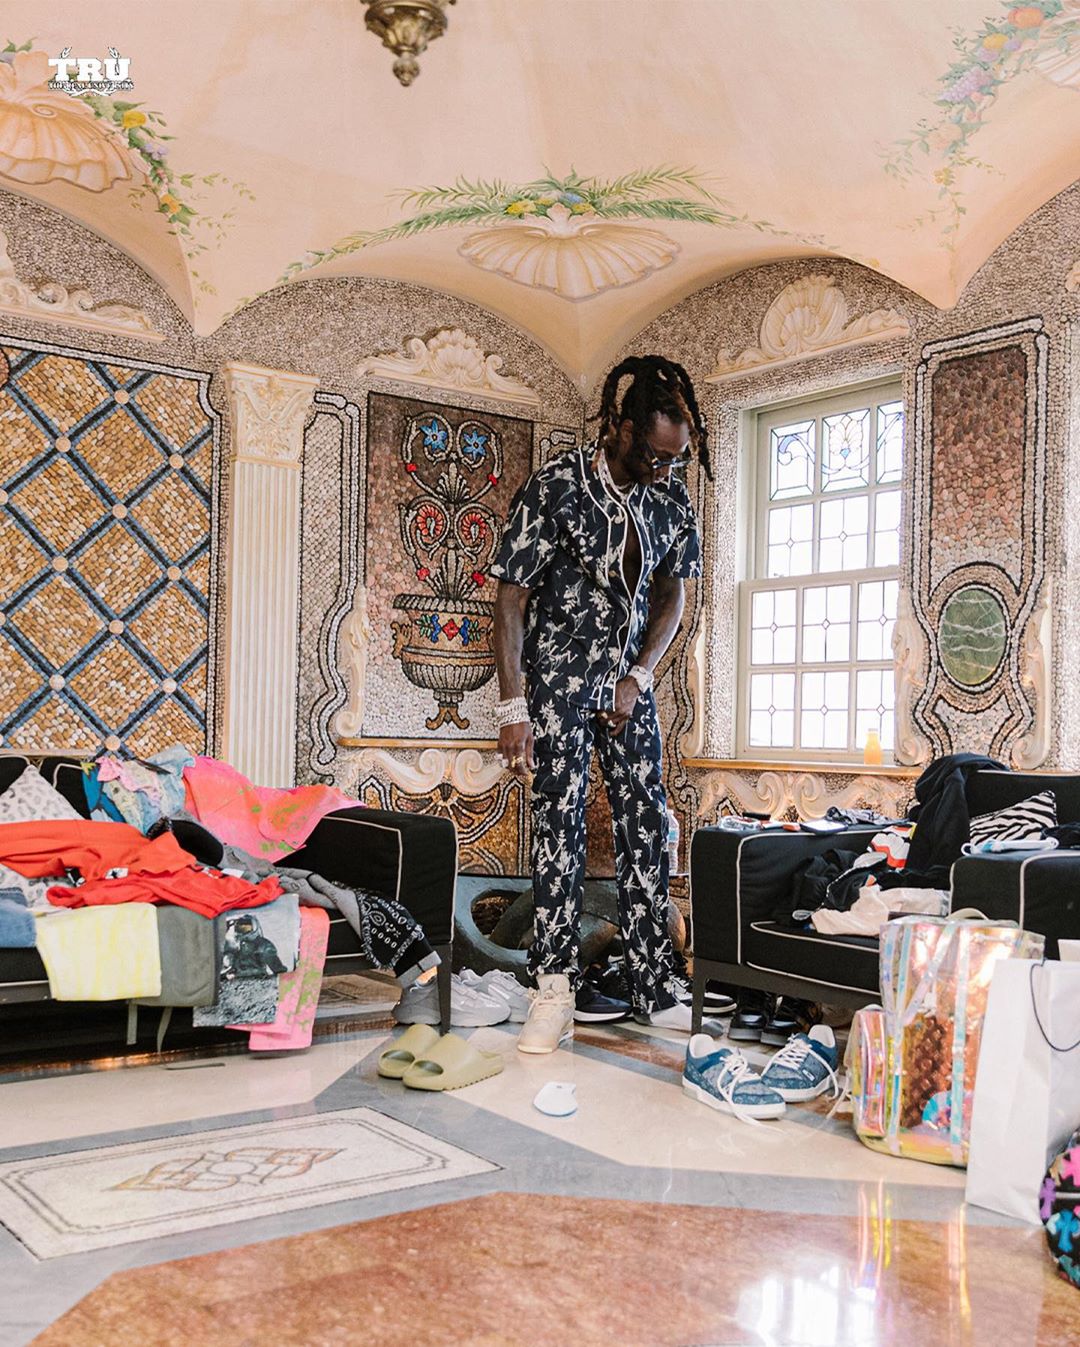 SPOTTED: 2 Chainz Relaxes in Louis Vuitton and Yeezy Slides